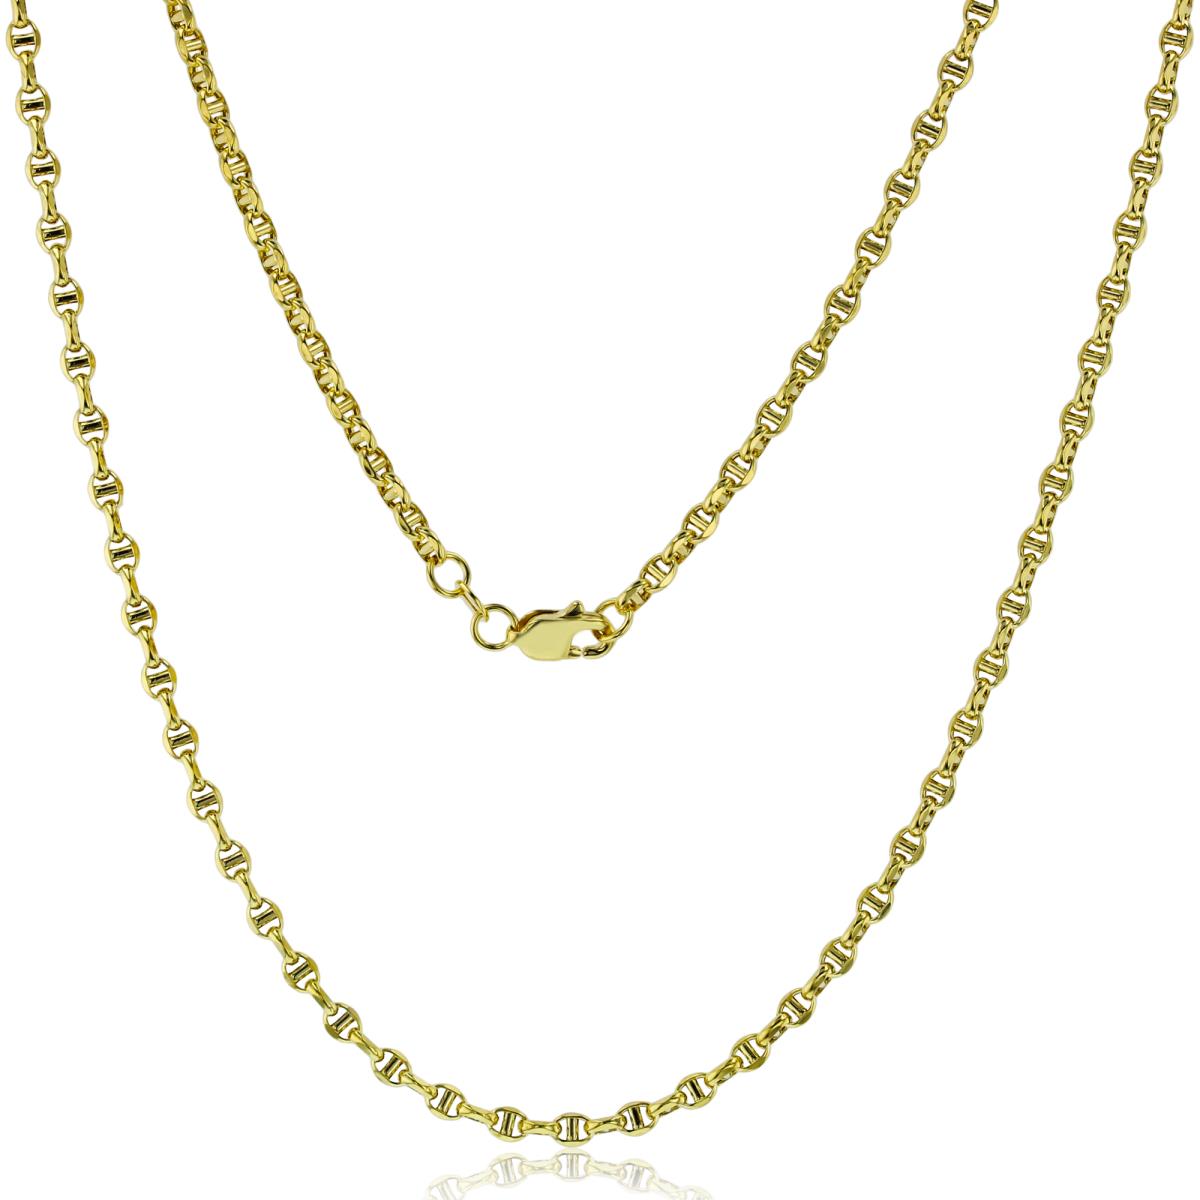 10K Yellow Gold Polished 3.00mm 22" Hollow Filk Chain